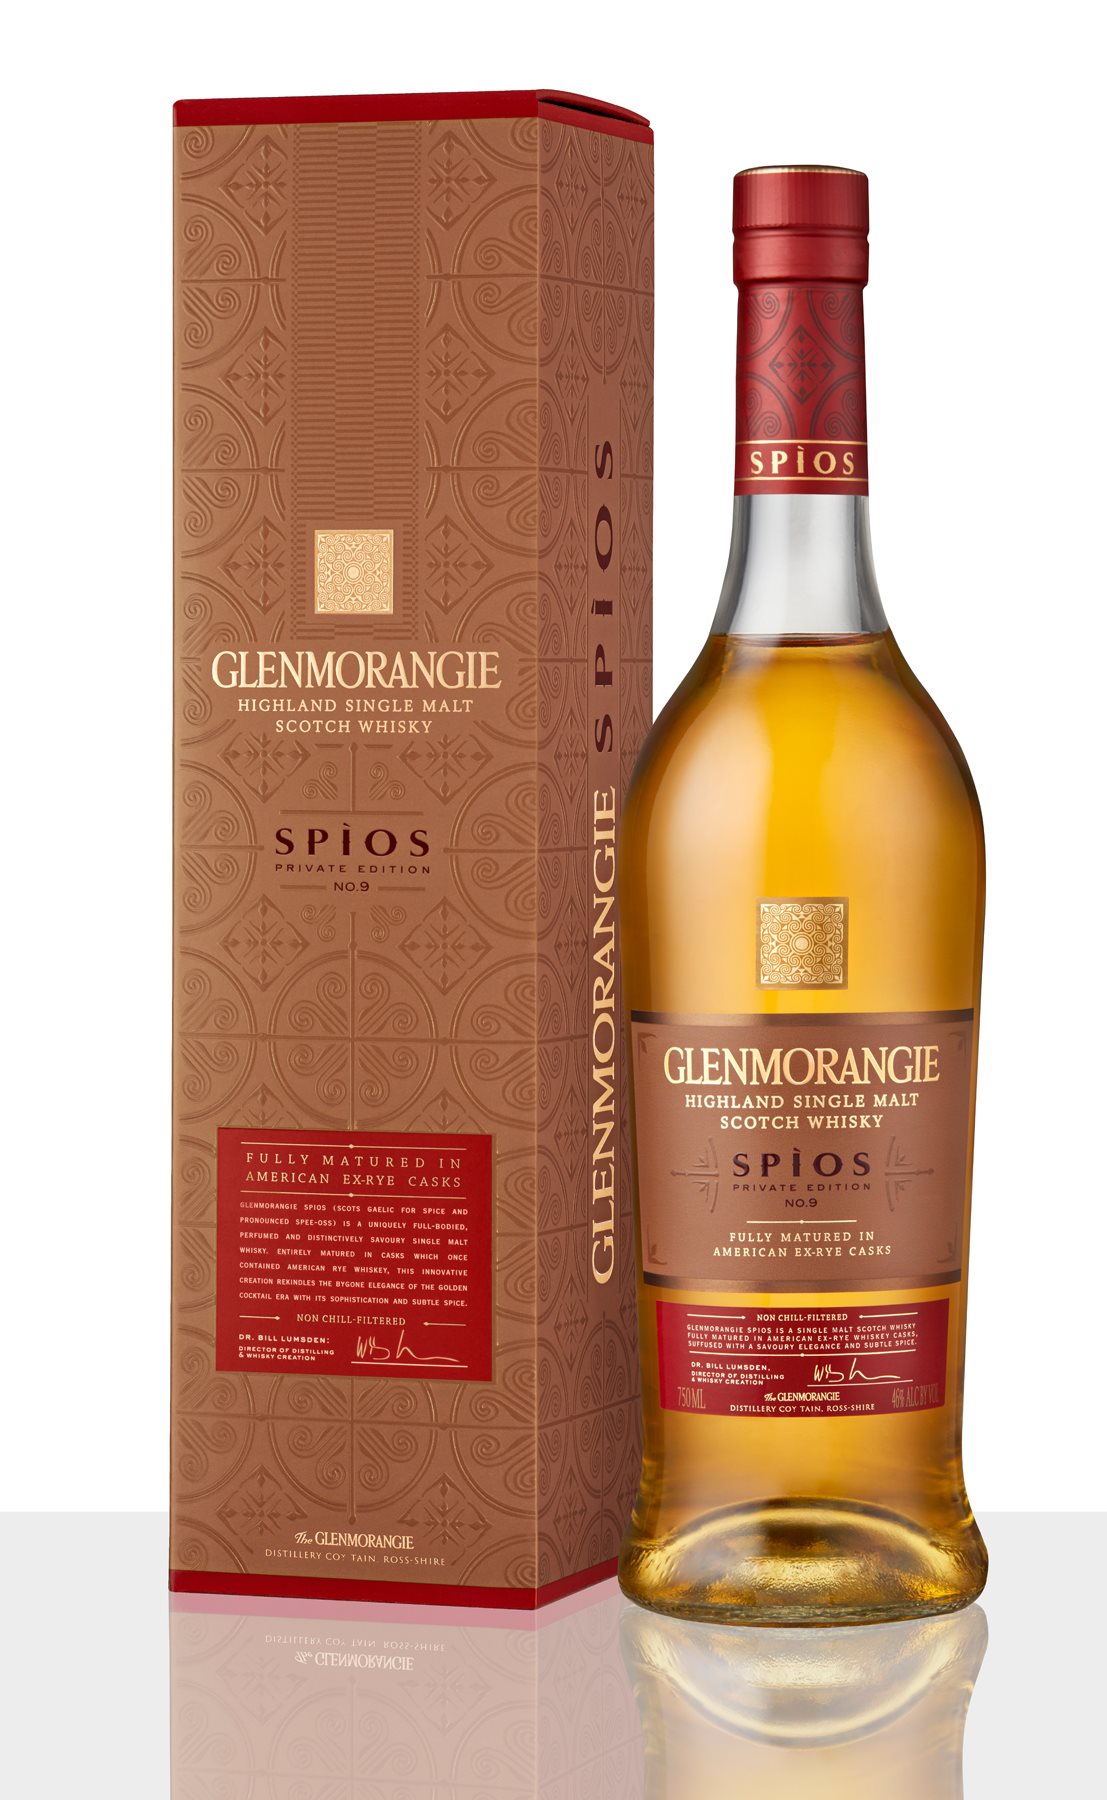 Glenmorangie Private Edition 9 Spios_Bottle and Pack on White background